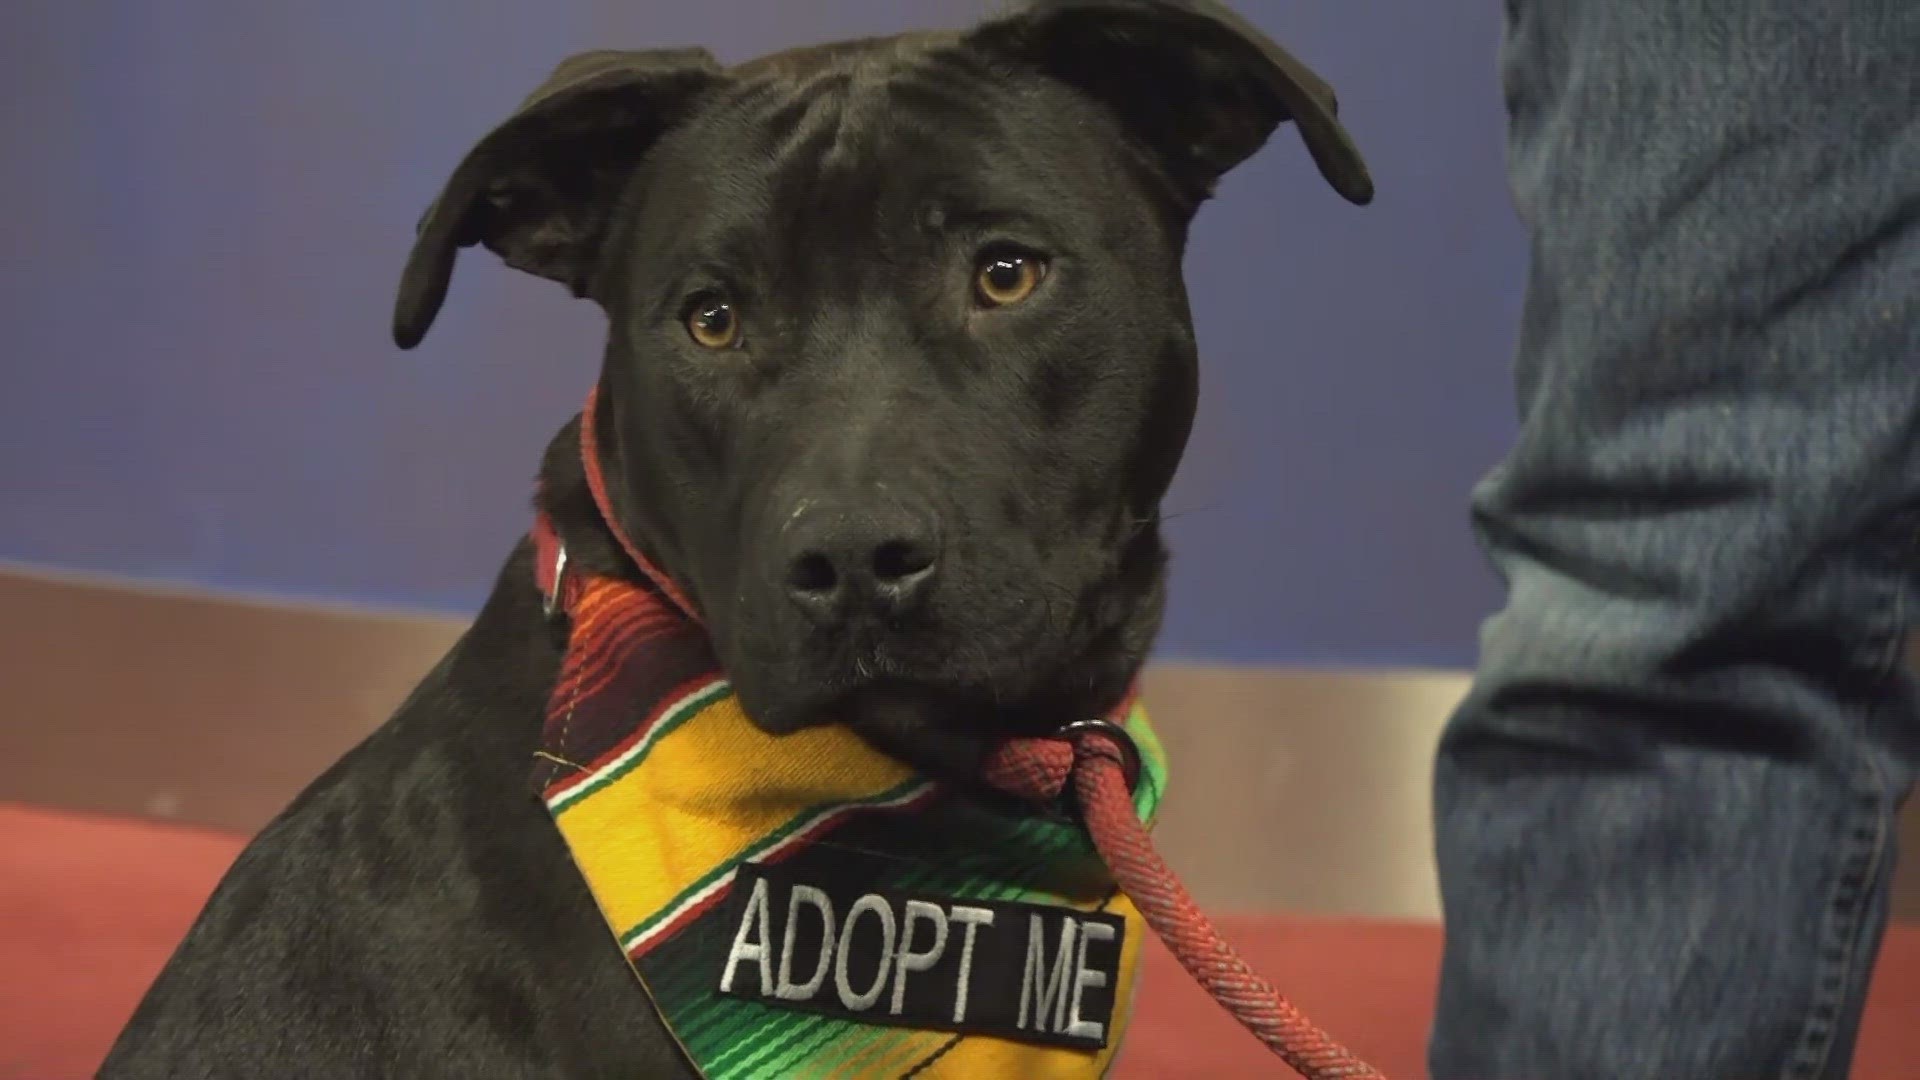 Polo is a 1-year-old black pit bull who has already been through training, knows several commands and is looking for a place to call home.